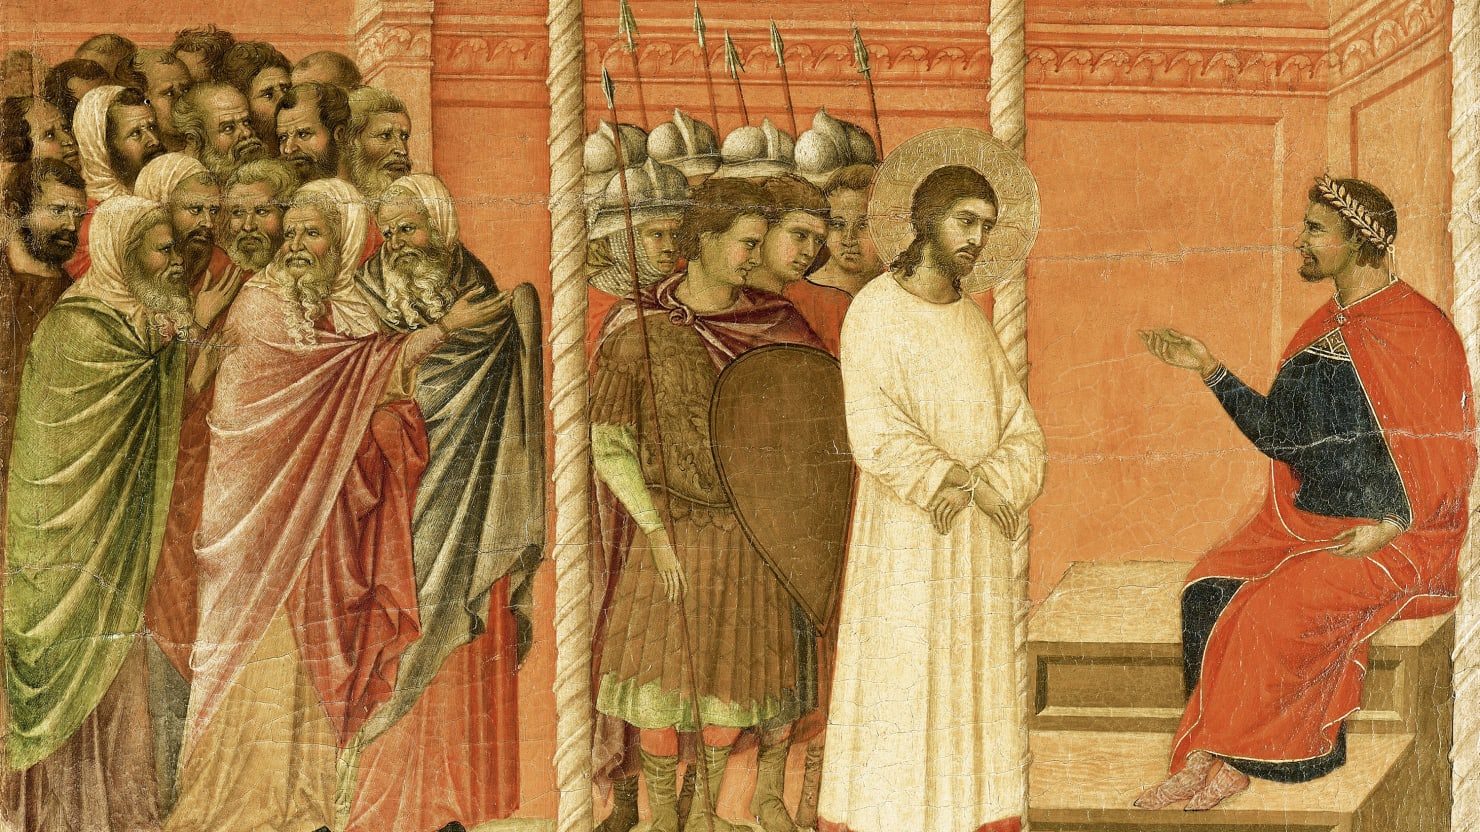 Infamous Decisions: Pontius Pilate's Role in the Crucifixion iamge